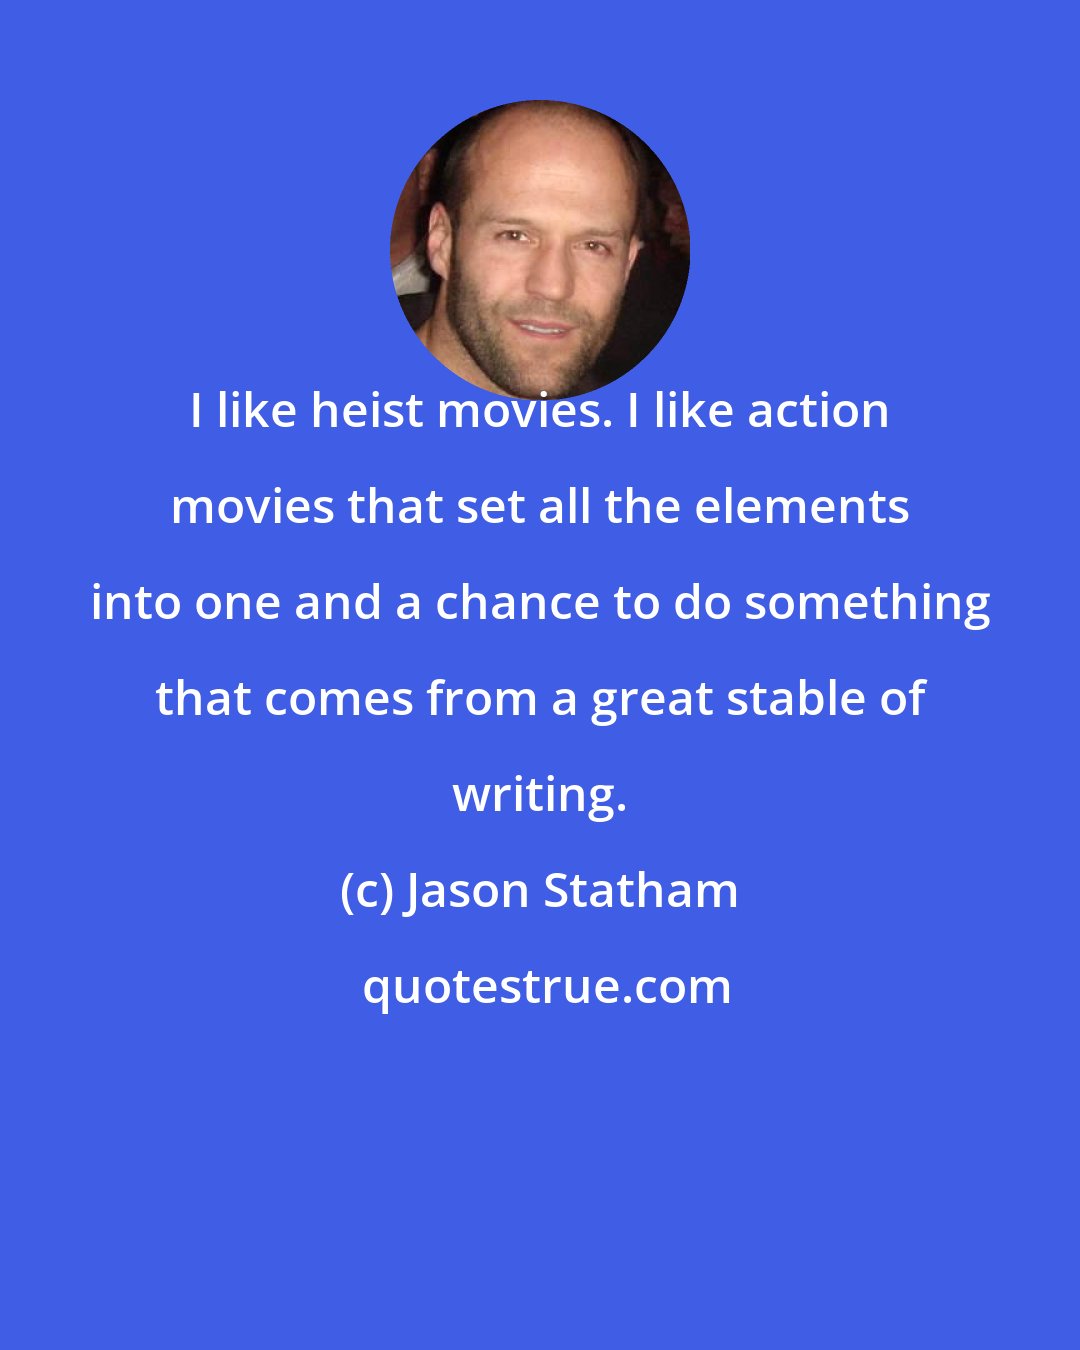 Jason Statham: I like heist movies. I like action movies that set all the elements into one and a chance to do something that comes from a great stable of writing.